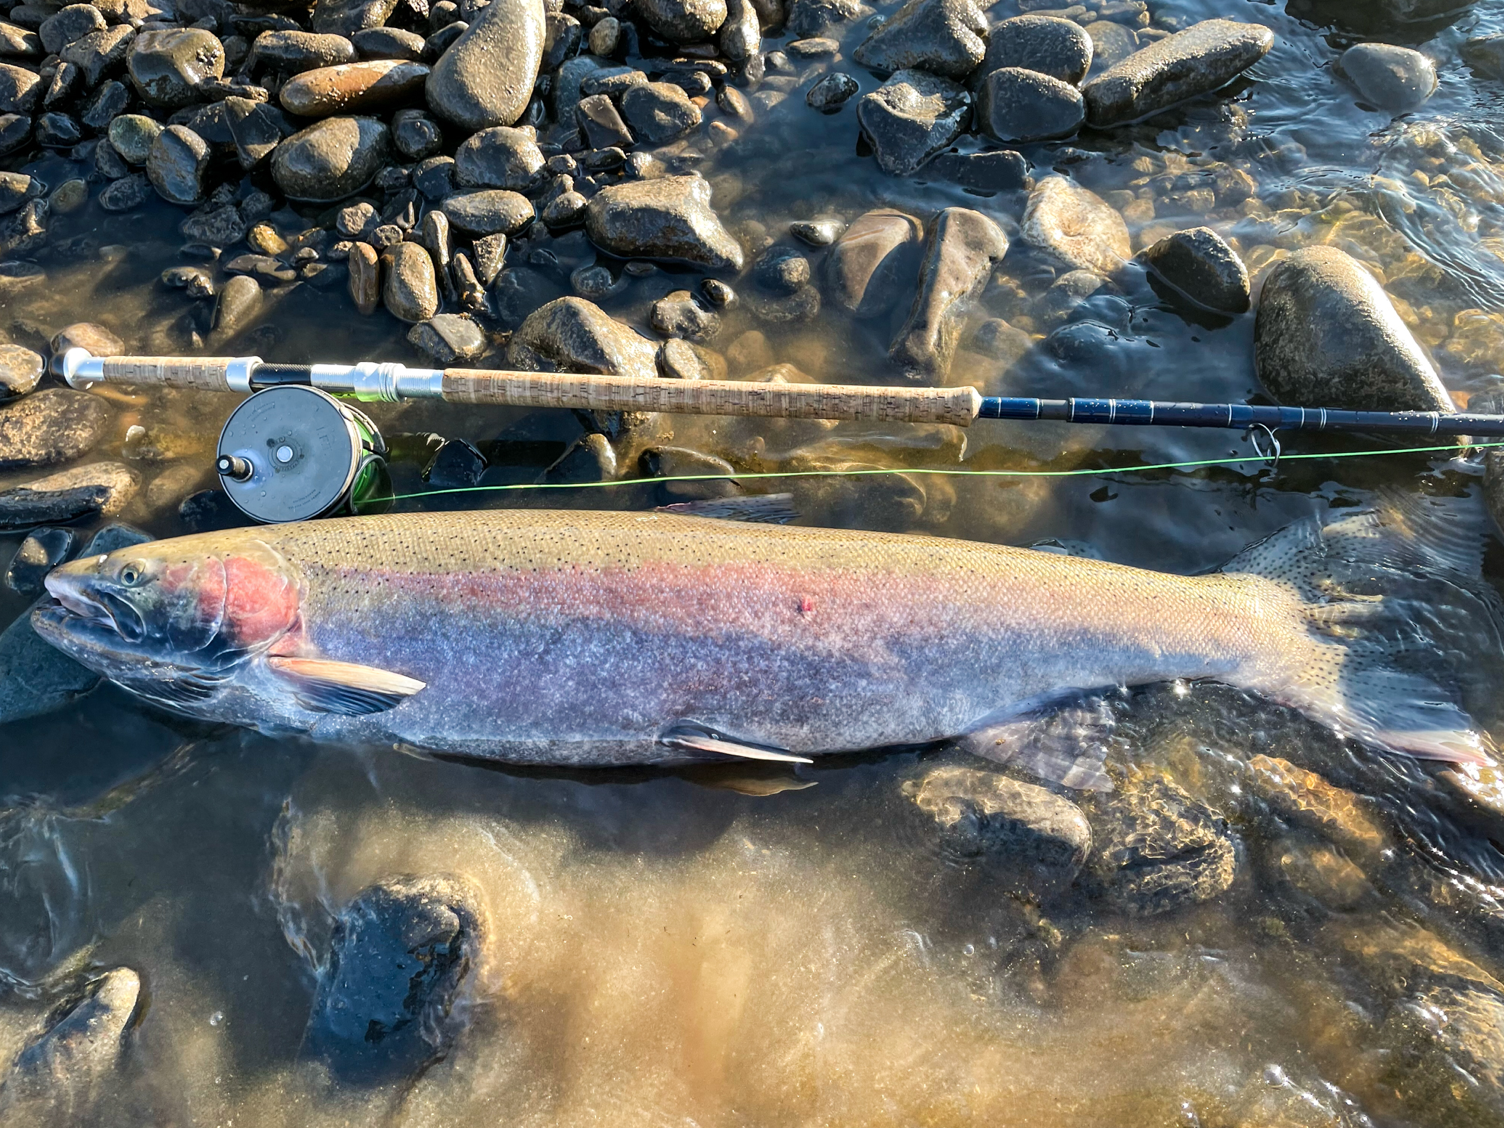 MONSTER STEELHEAD: Idaho angler sets new state record with 41-inch